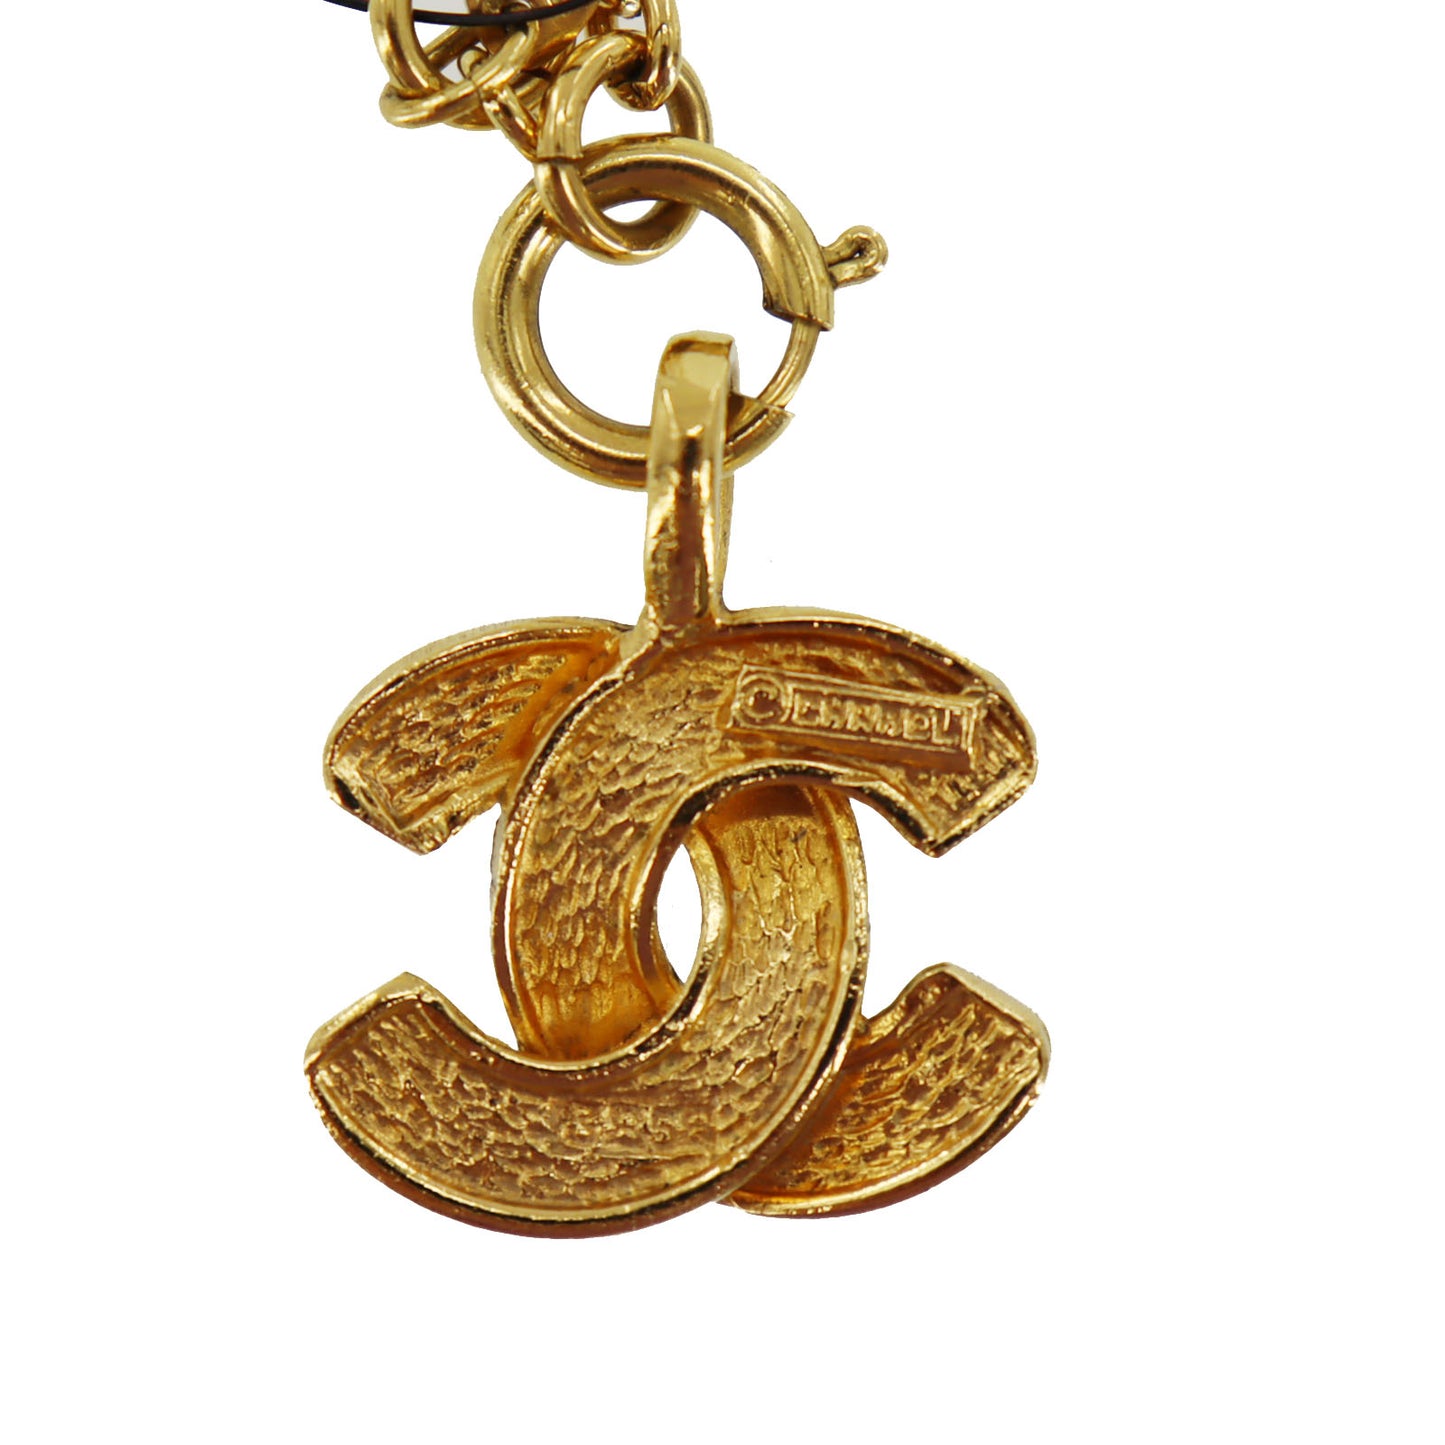 CHANEL CC Logos Gold Plated Chain Used Necklace Vintage #AH669